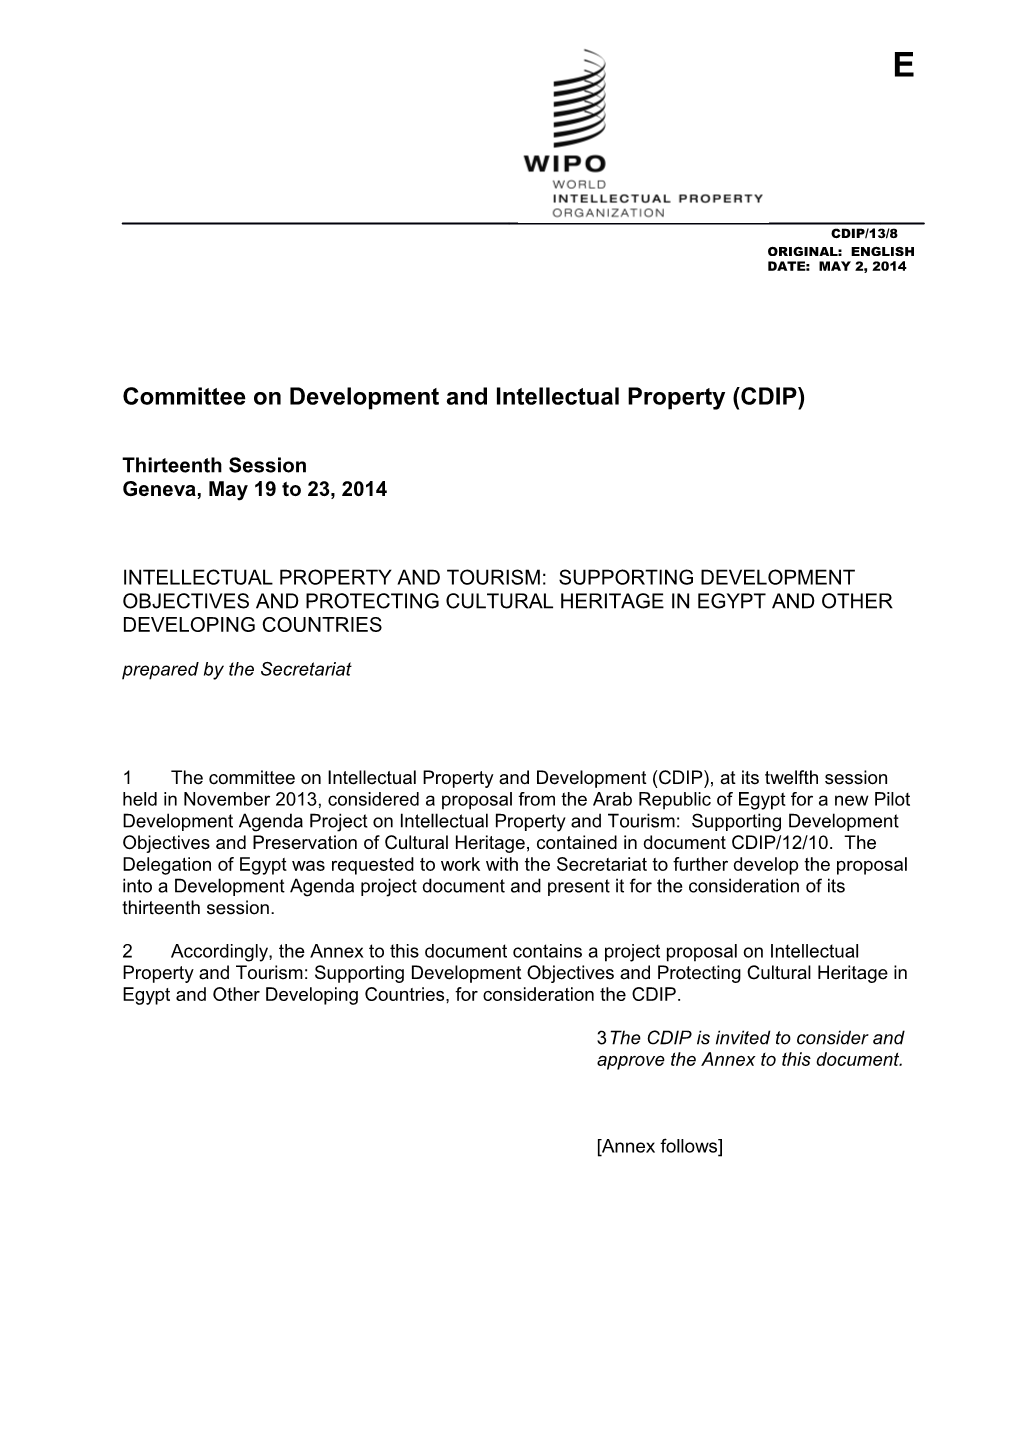 Committee on Development and Intellectual Property (CDIP) s3